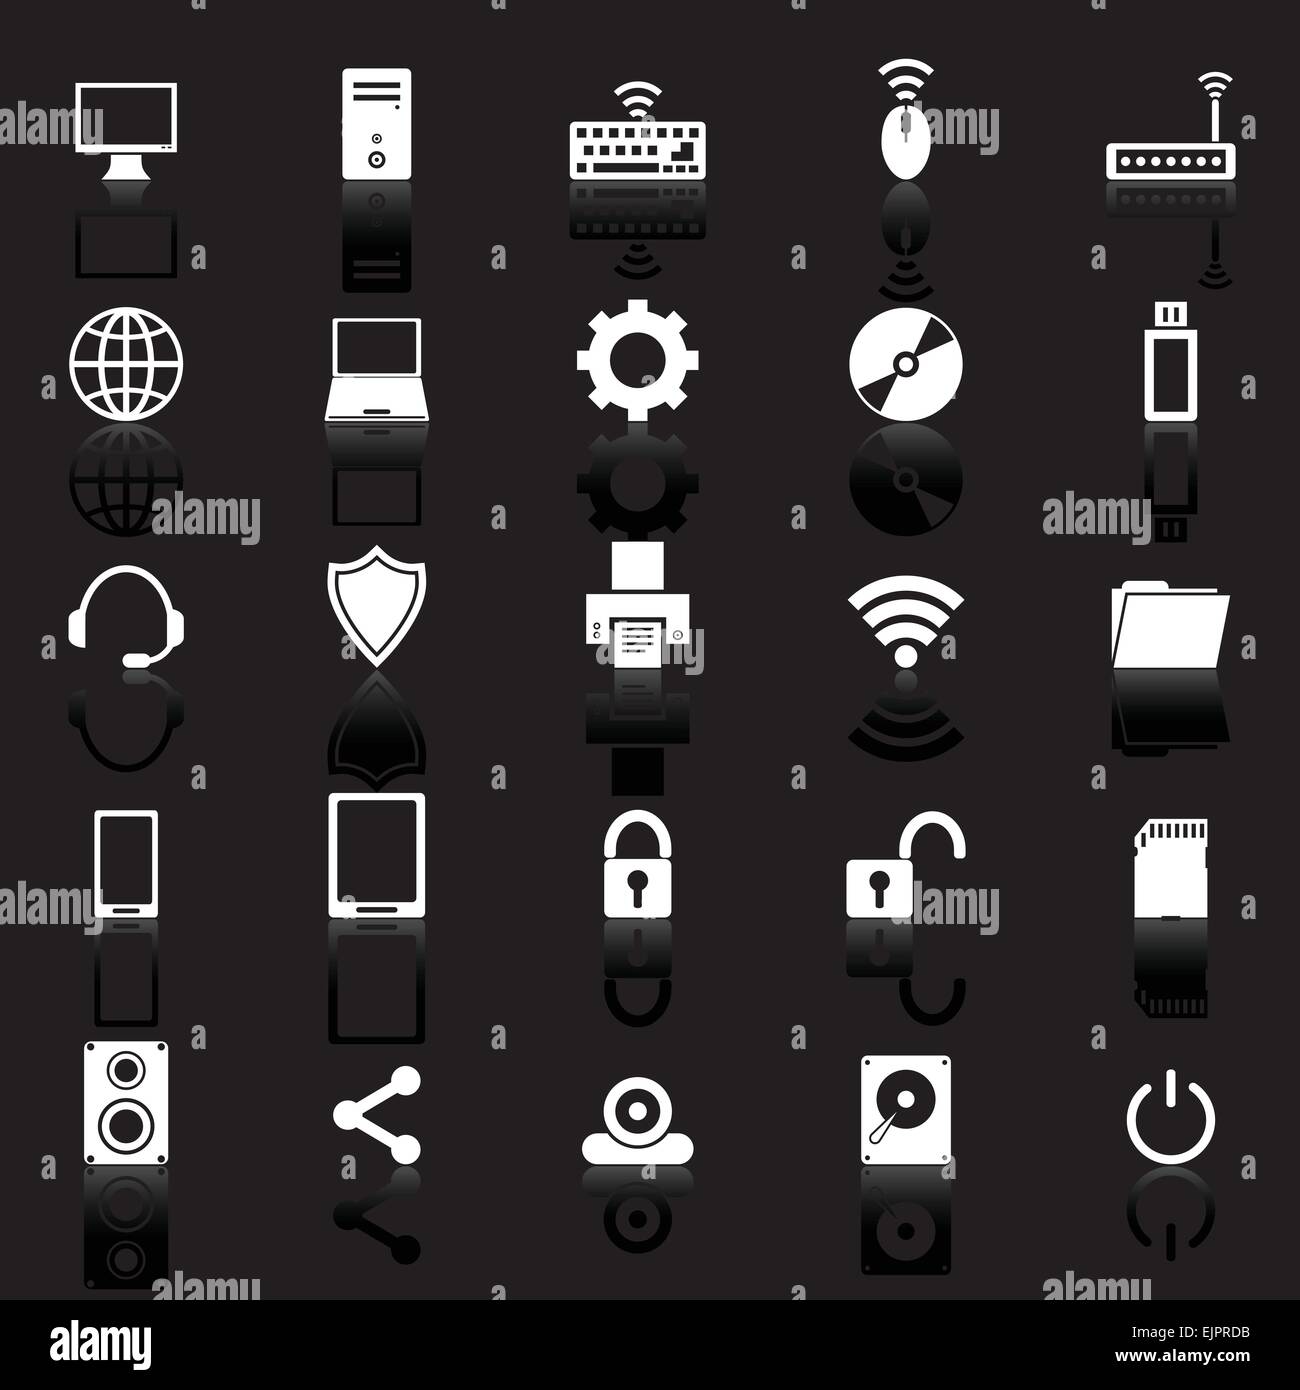 Computer icons with reflect on black background, stock vector Stock Vector